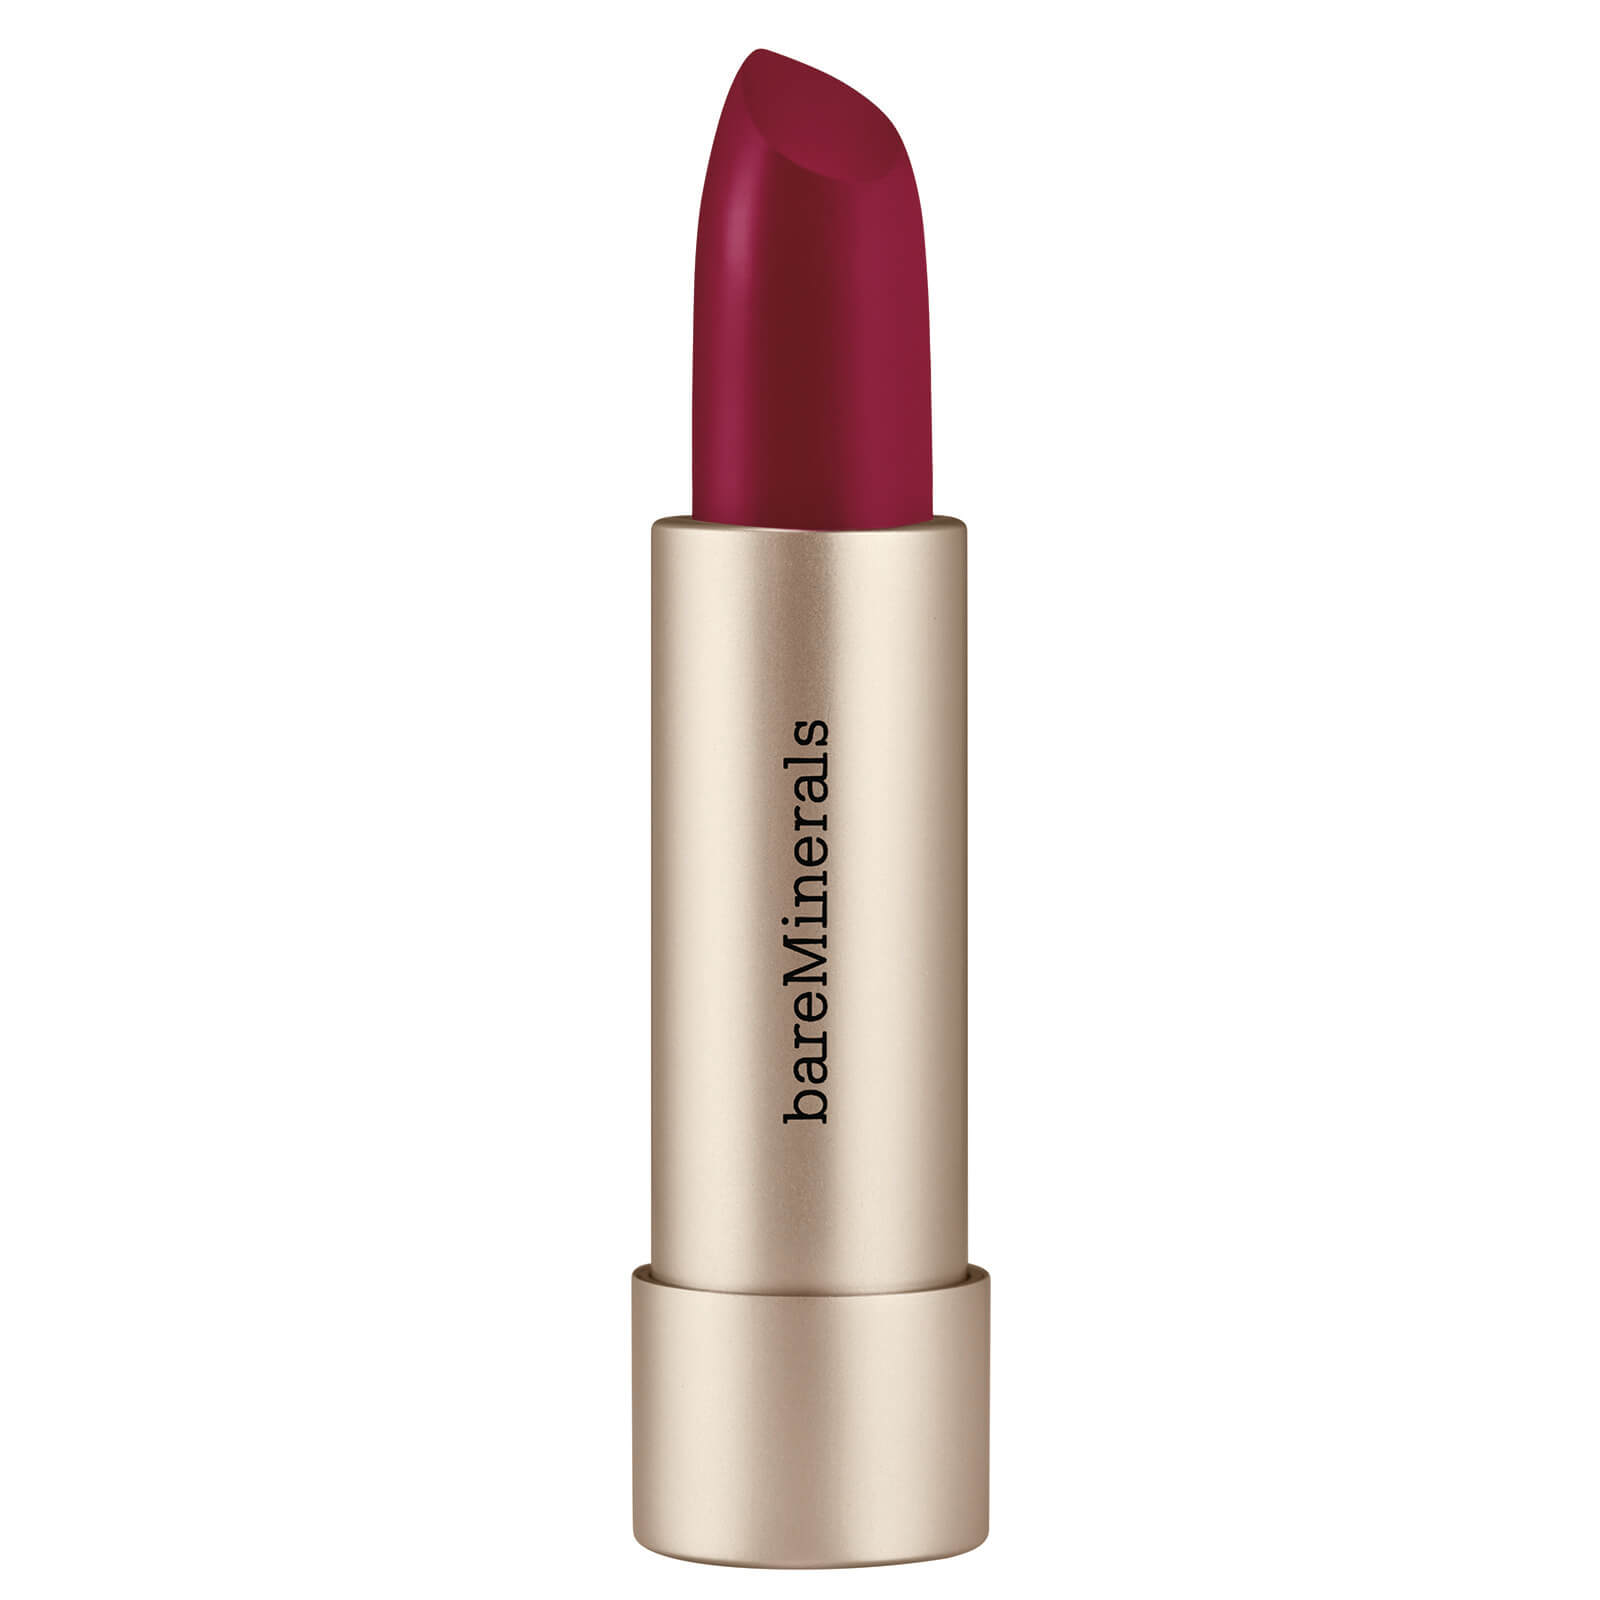 bareMinerals Mineralist Hydra Smoothing Lipstick 3.6g (Various Shades) - Fortitude